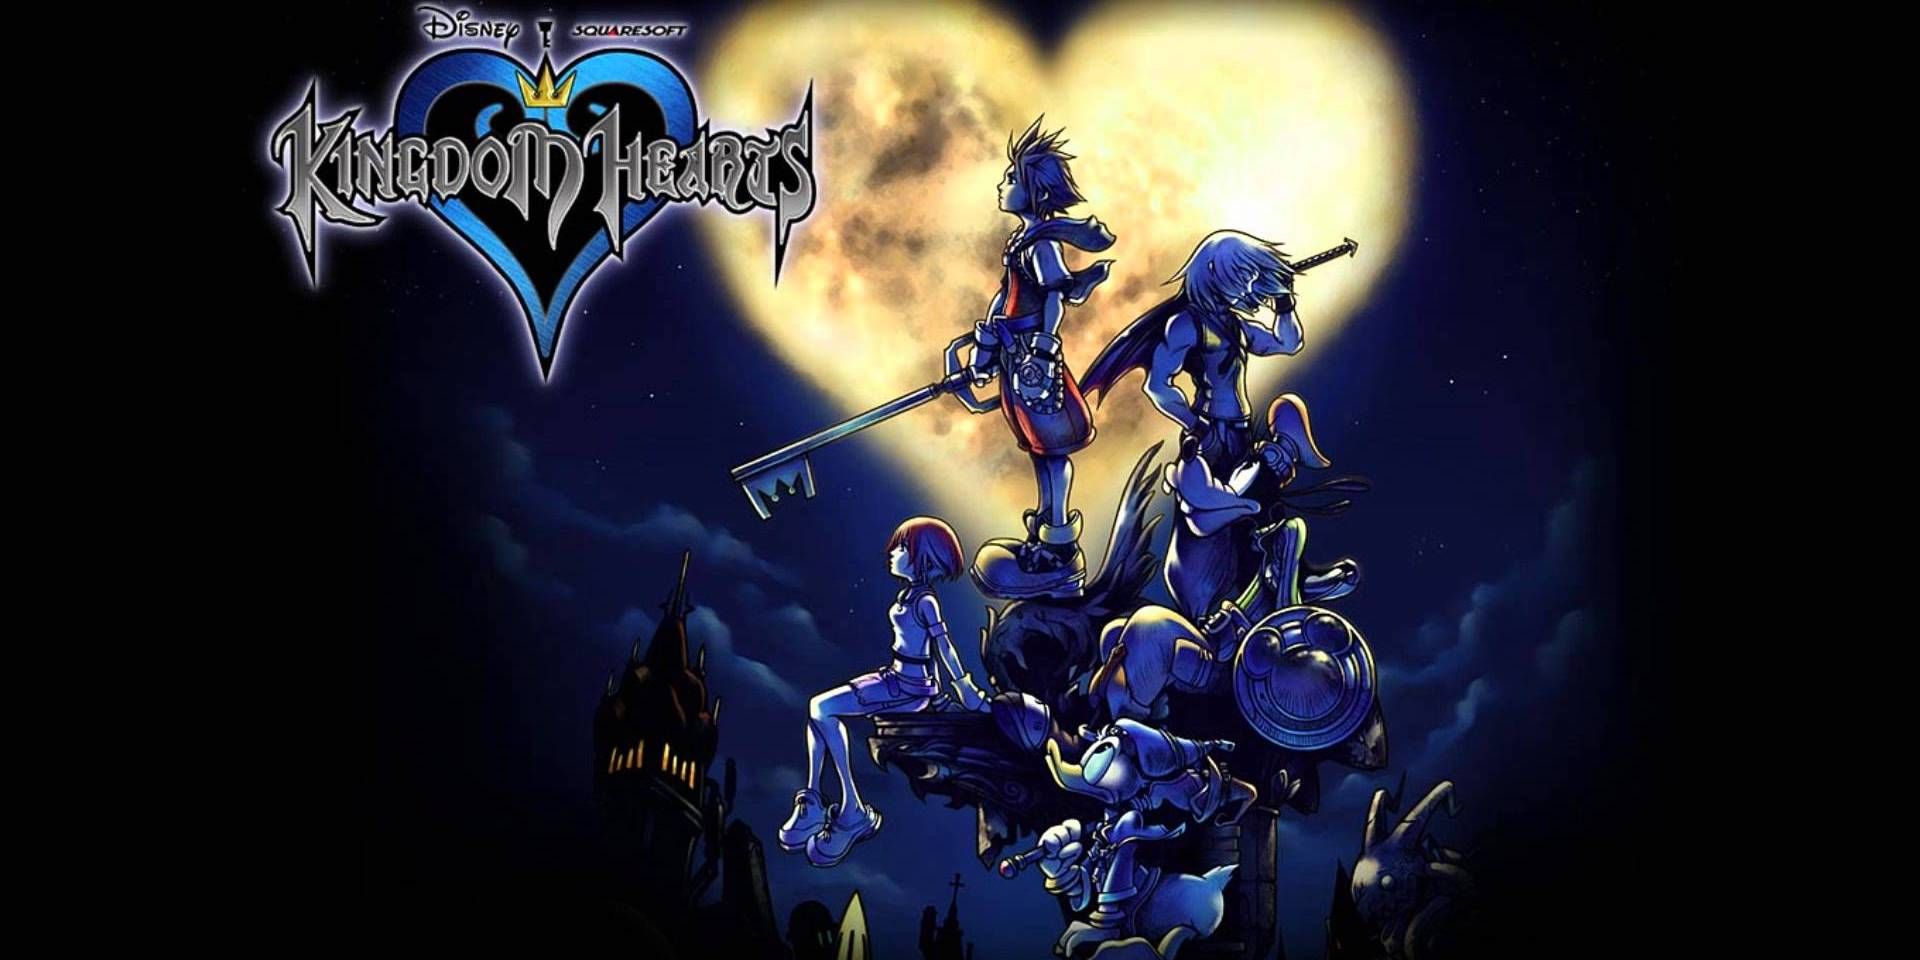 Characters look at the moon from Kingdom Hearts 